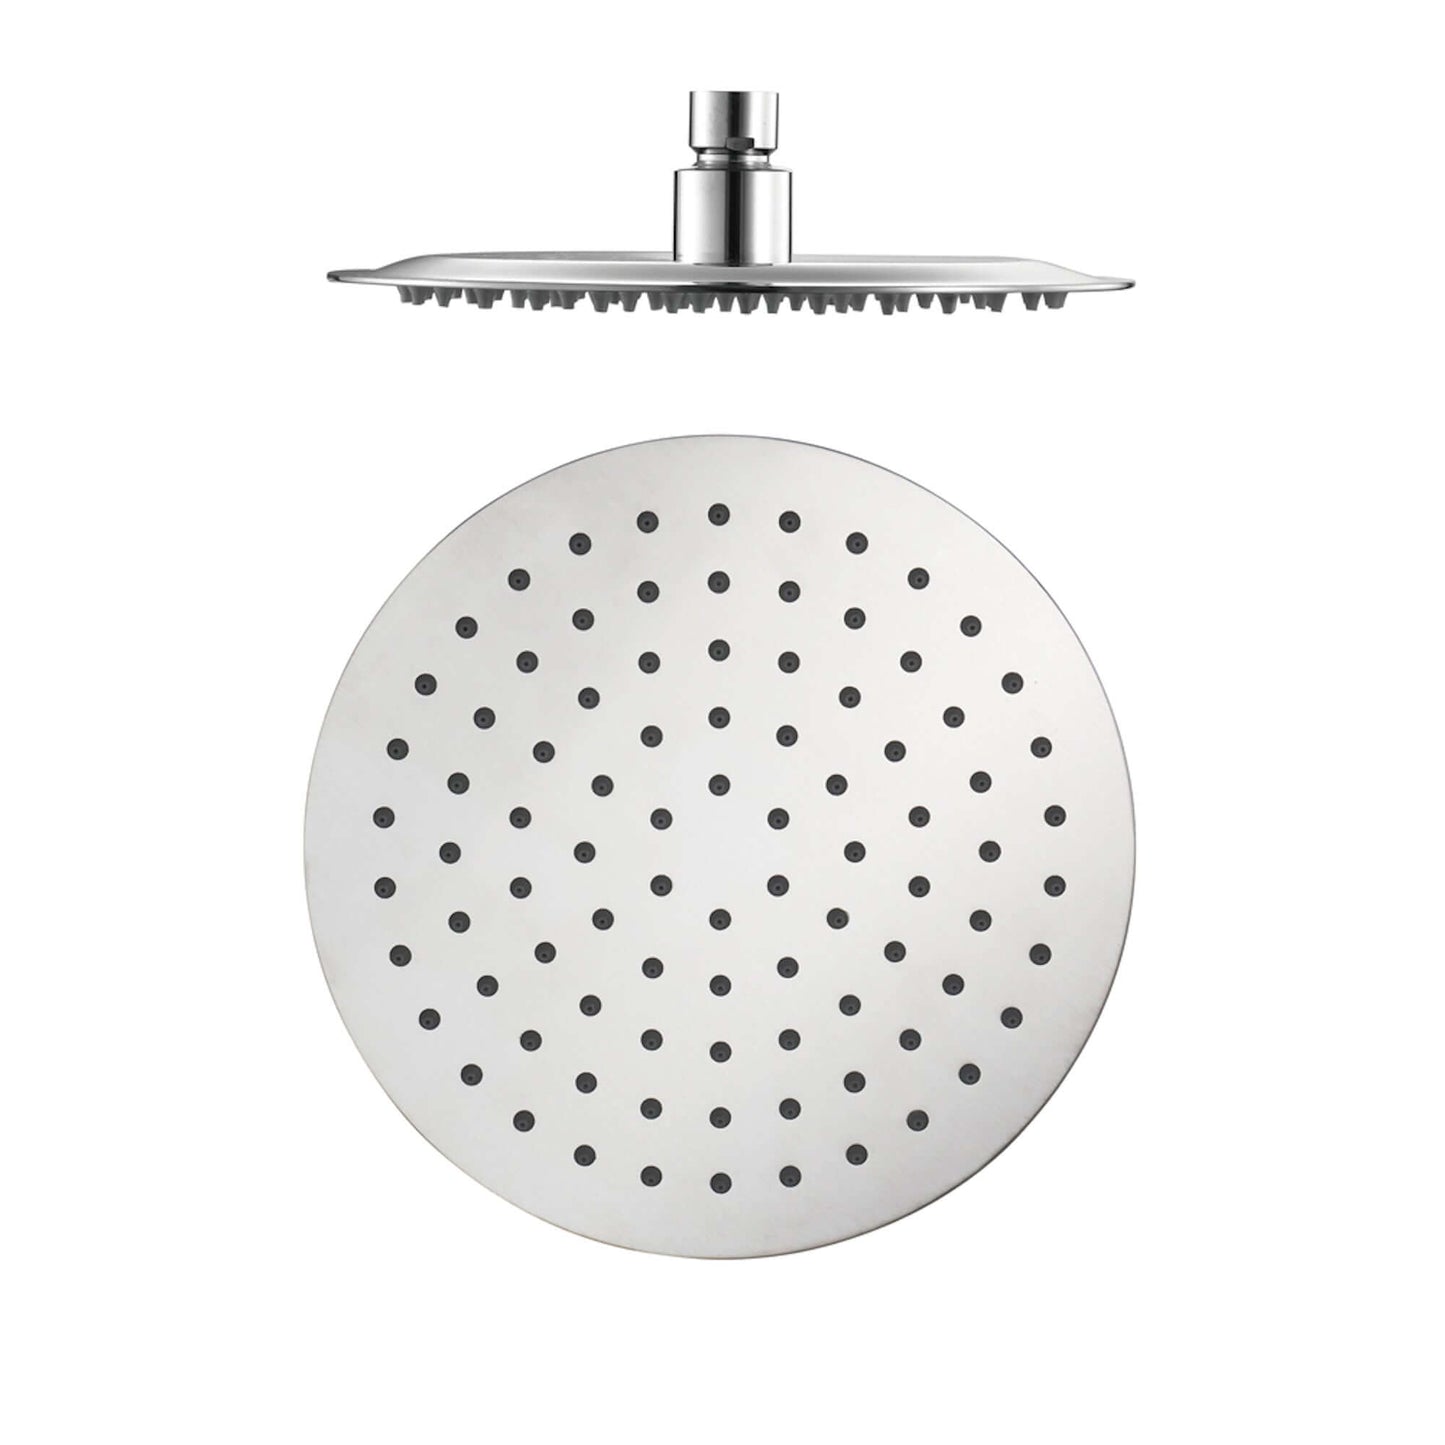 Contemporary Ceiling Fixed Round Ultra Slim Stainless Steel Shower Head 8" With 180mm Ceiling Shower Arm - Chrome